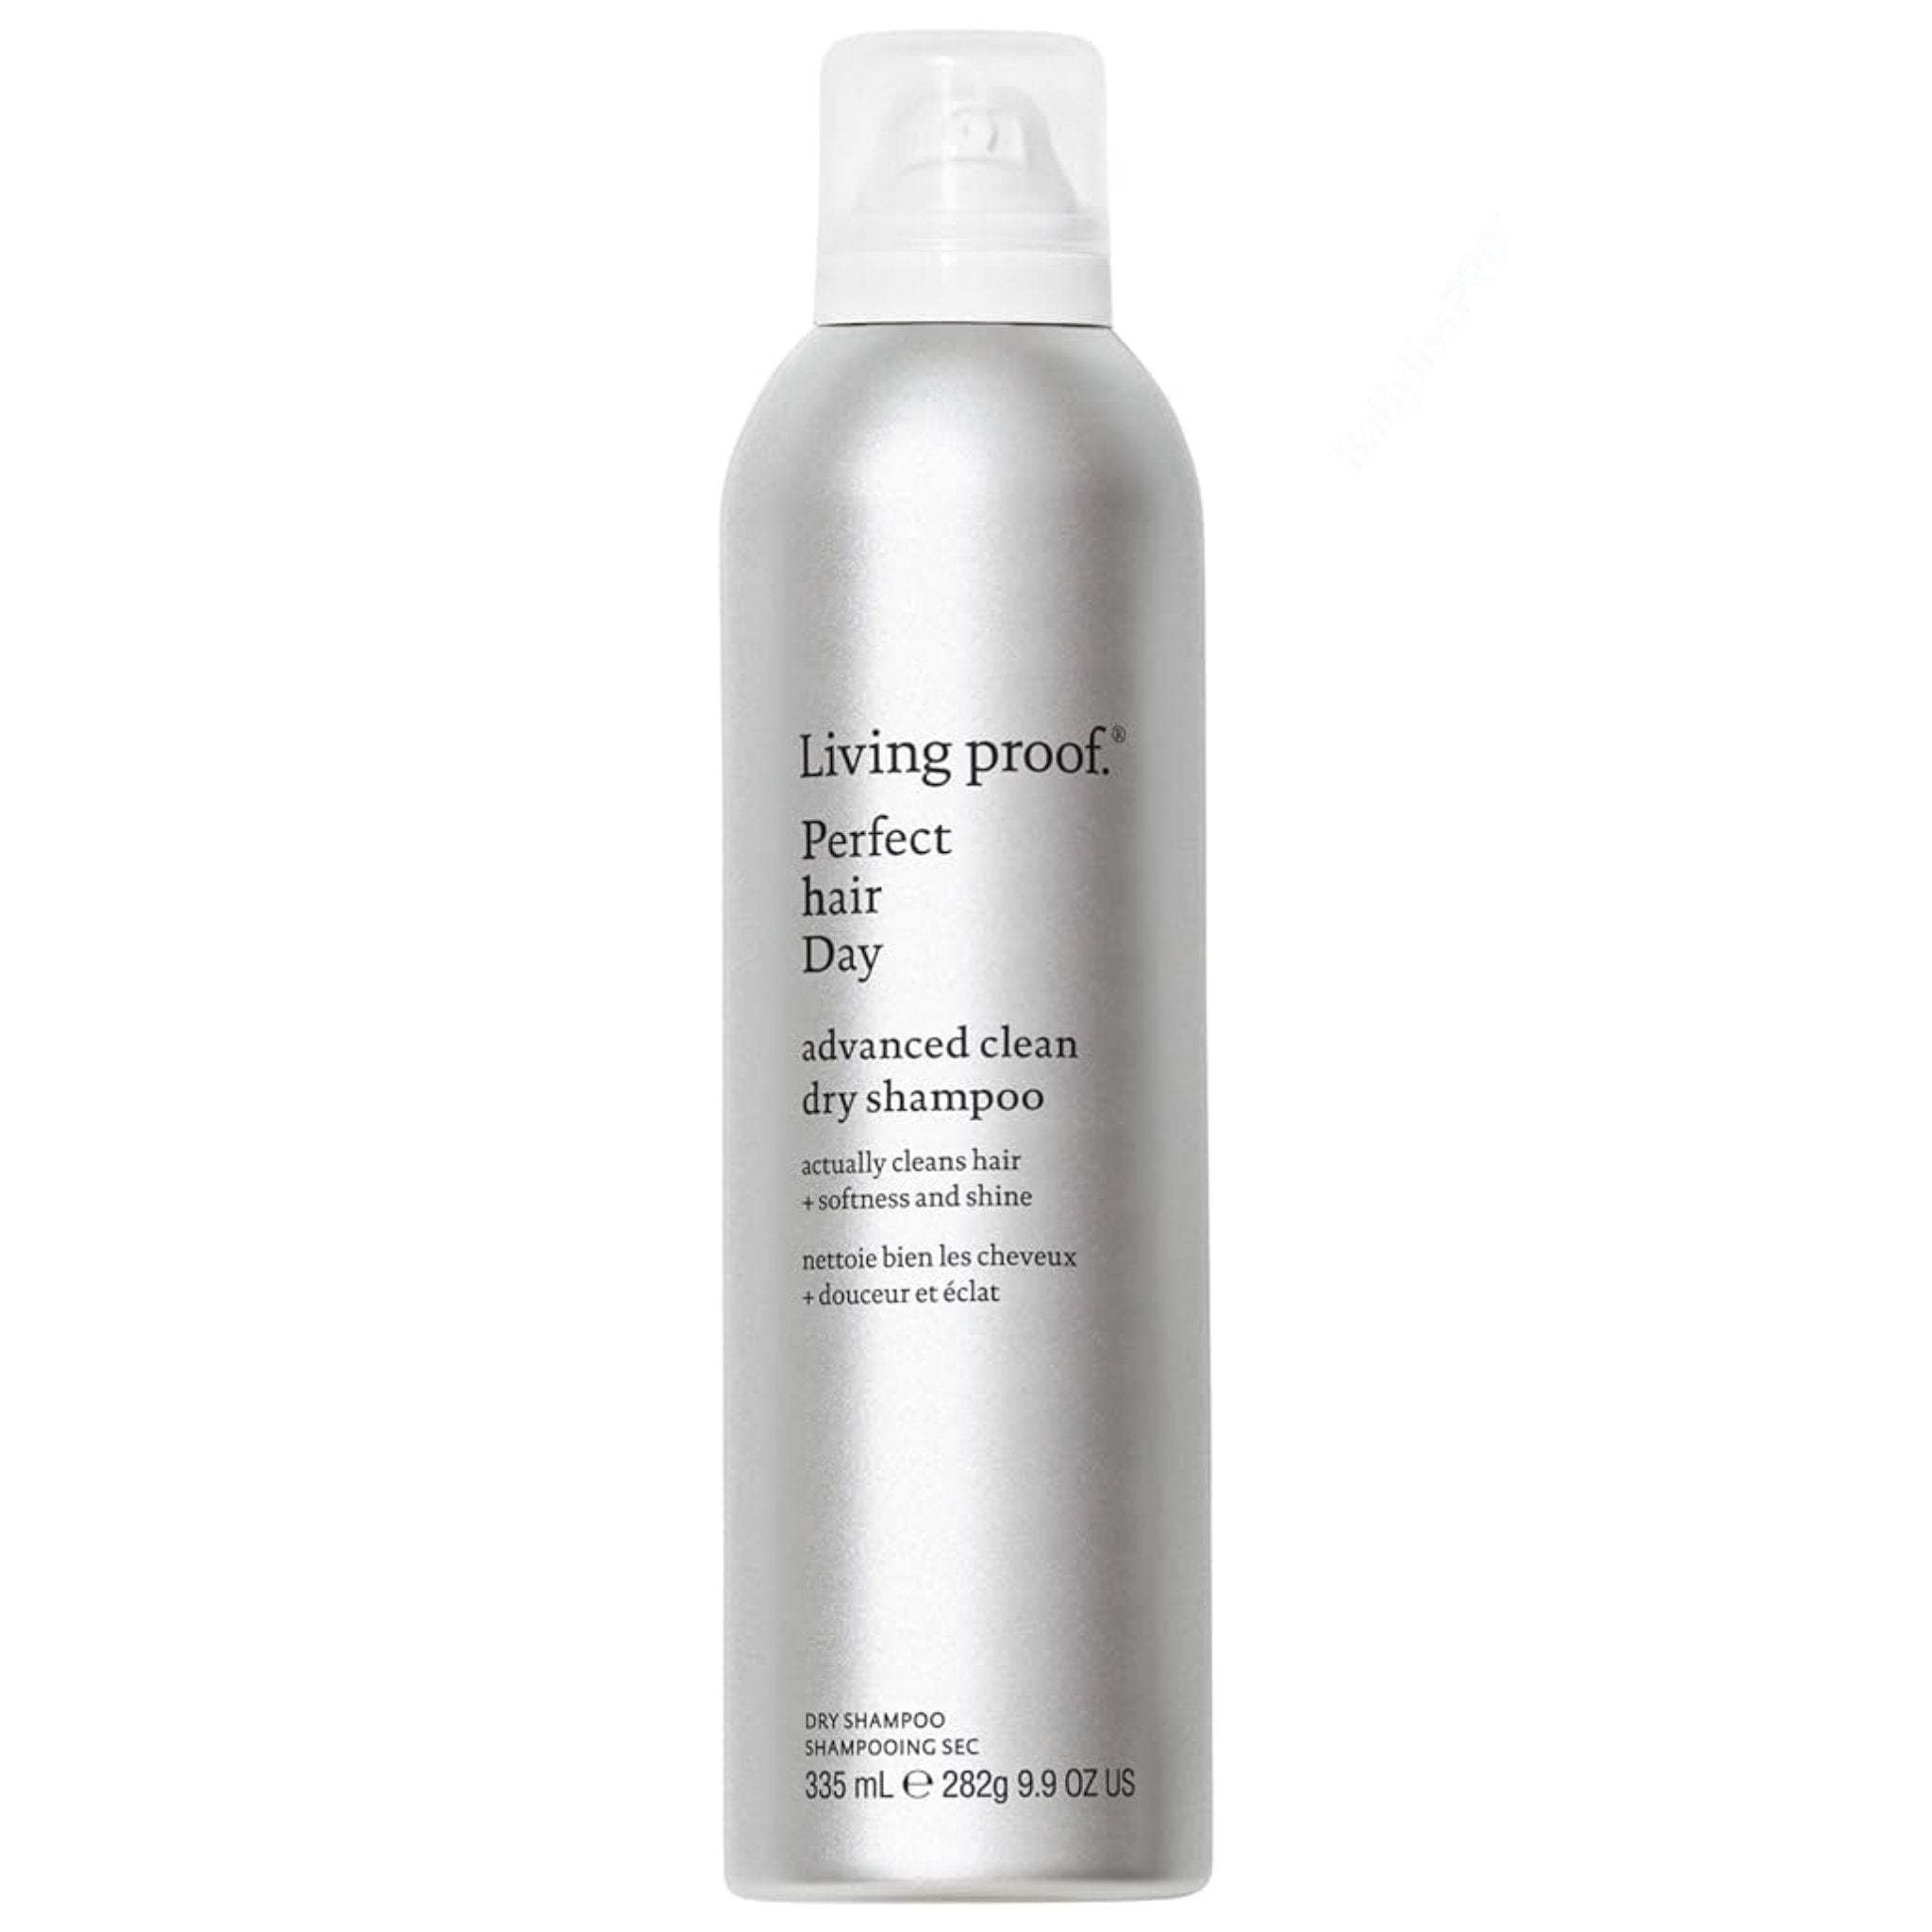 Living Proof. Shampoing Sec Advanced Perfect Hair Day - 335 ml (en solde) - Concept C. Shop